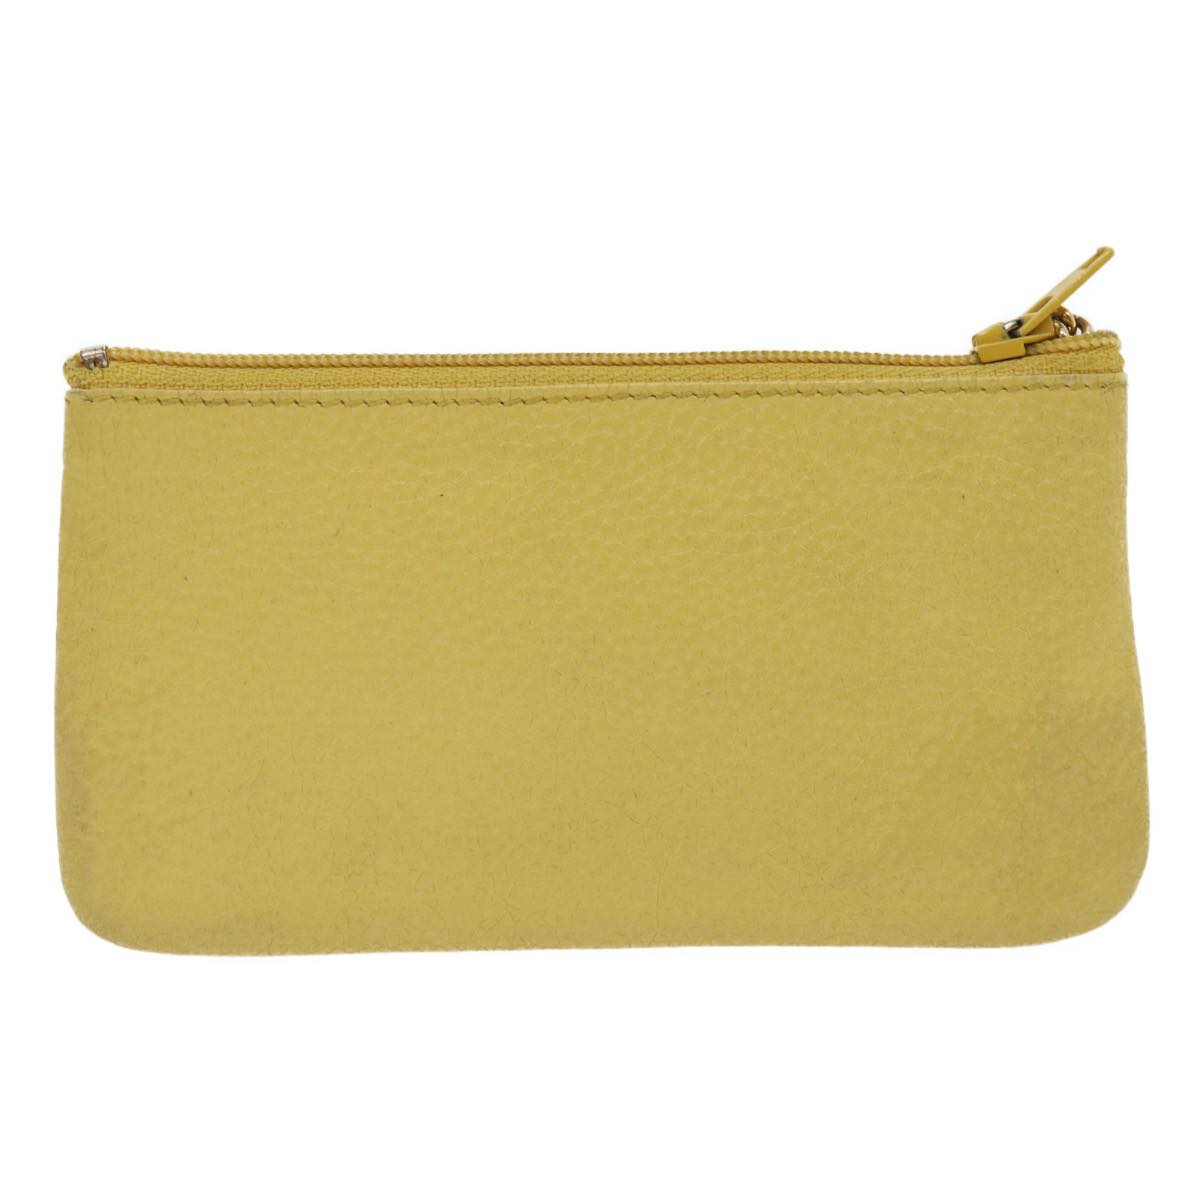 CELINE Coin Purse Leather Yellow Auth hk413 - 0